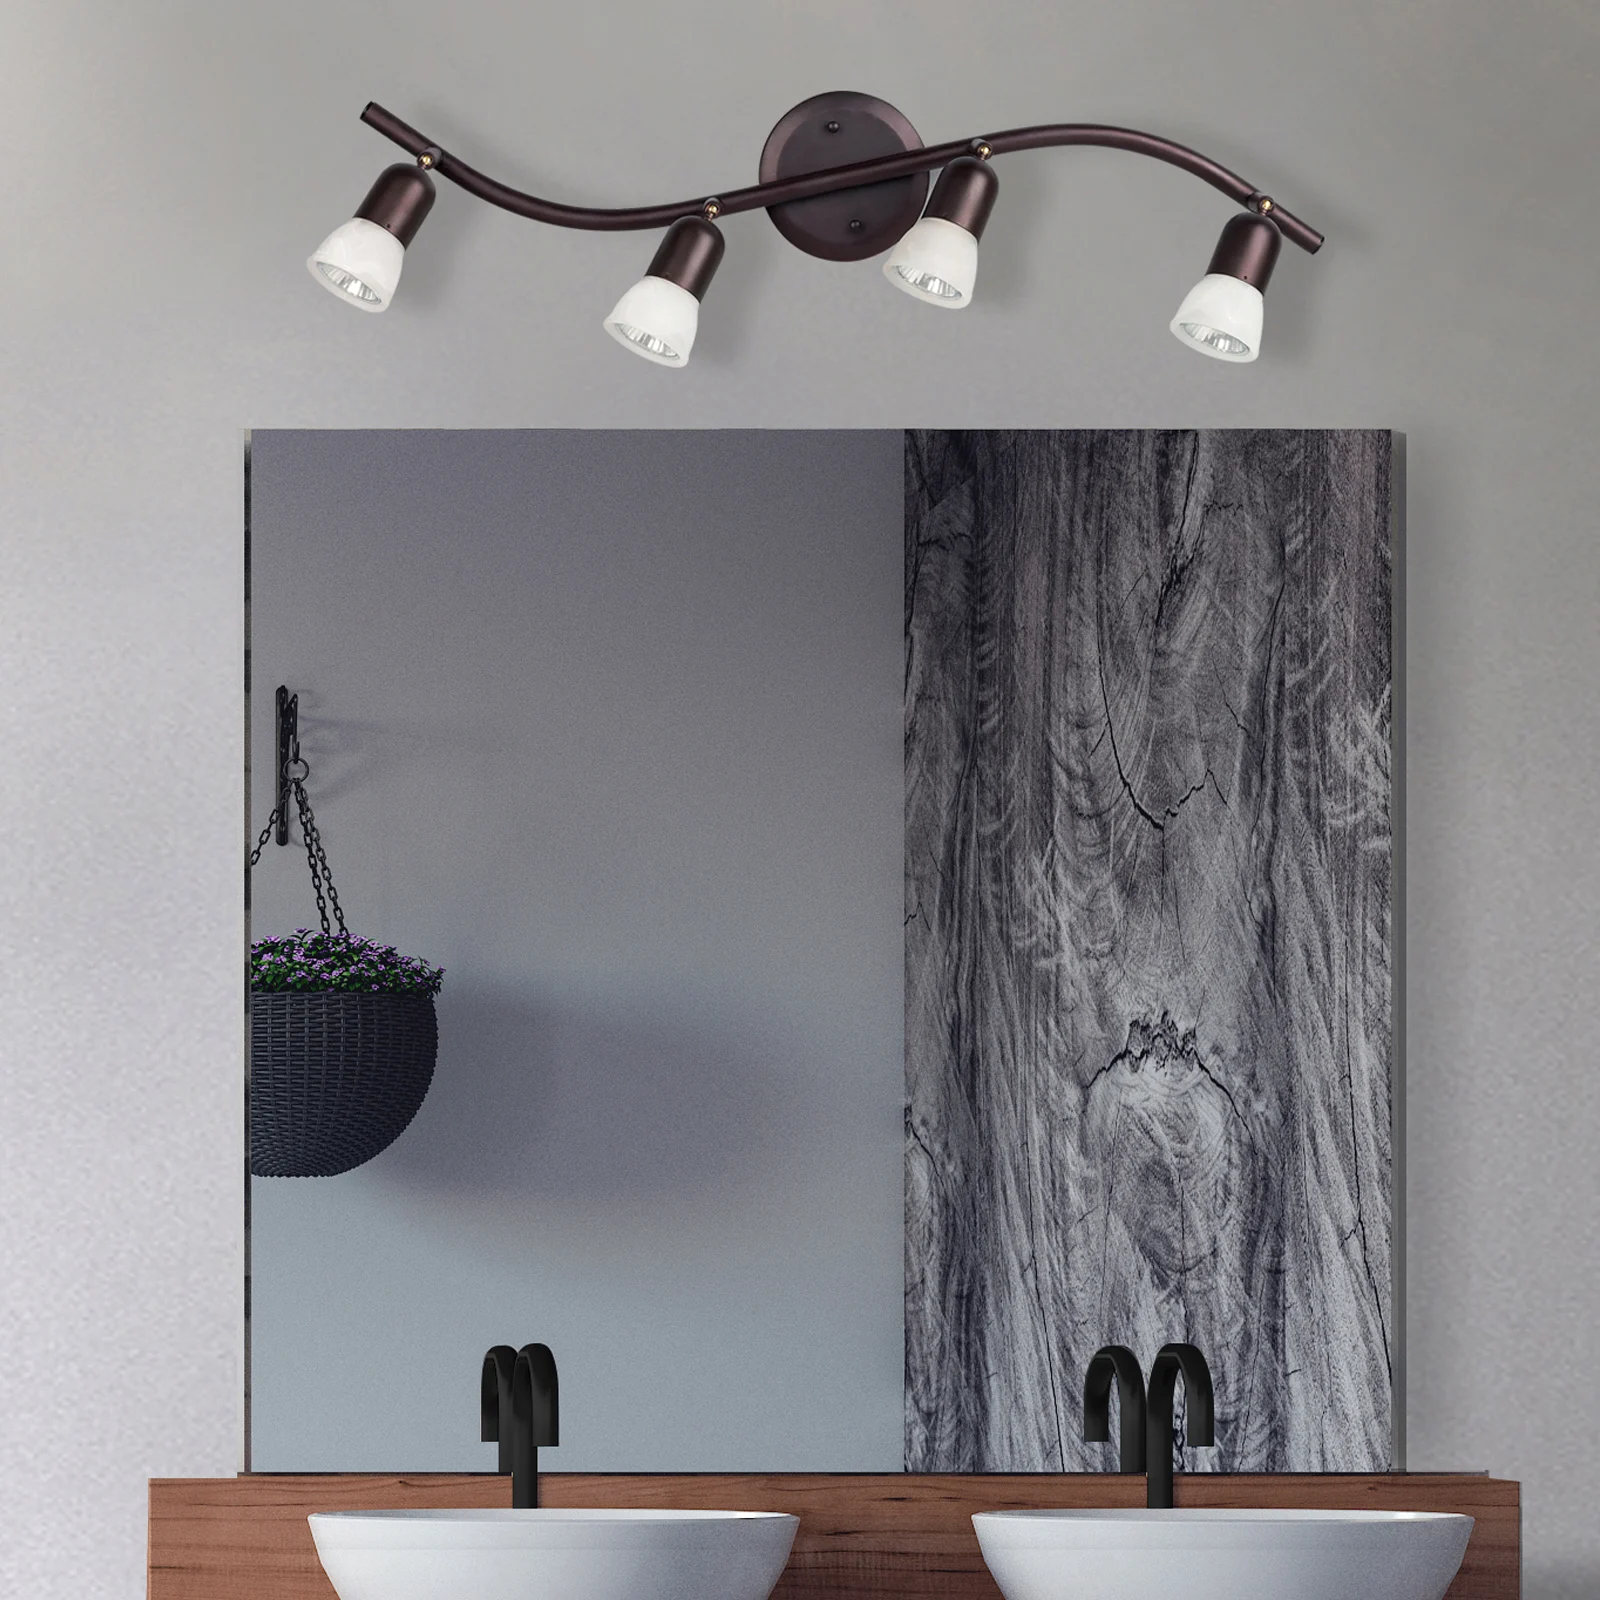 A bathroom with track lighting